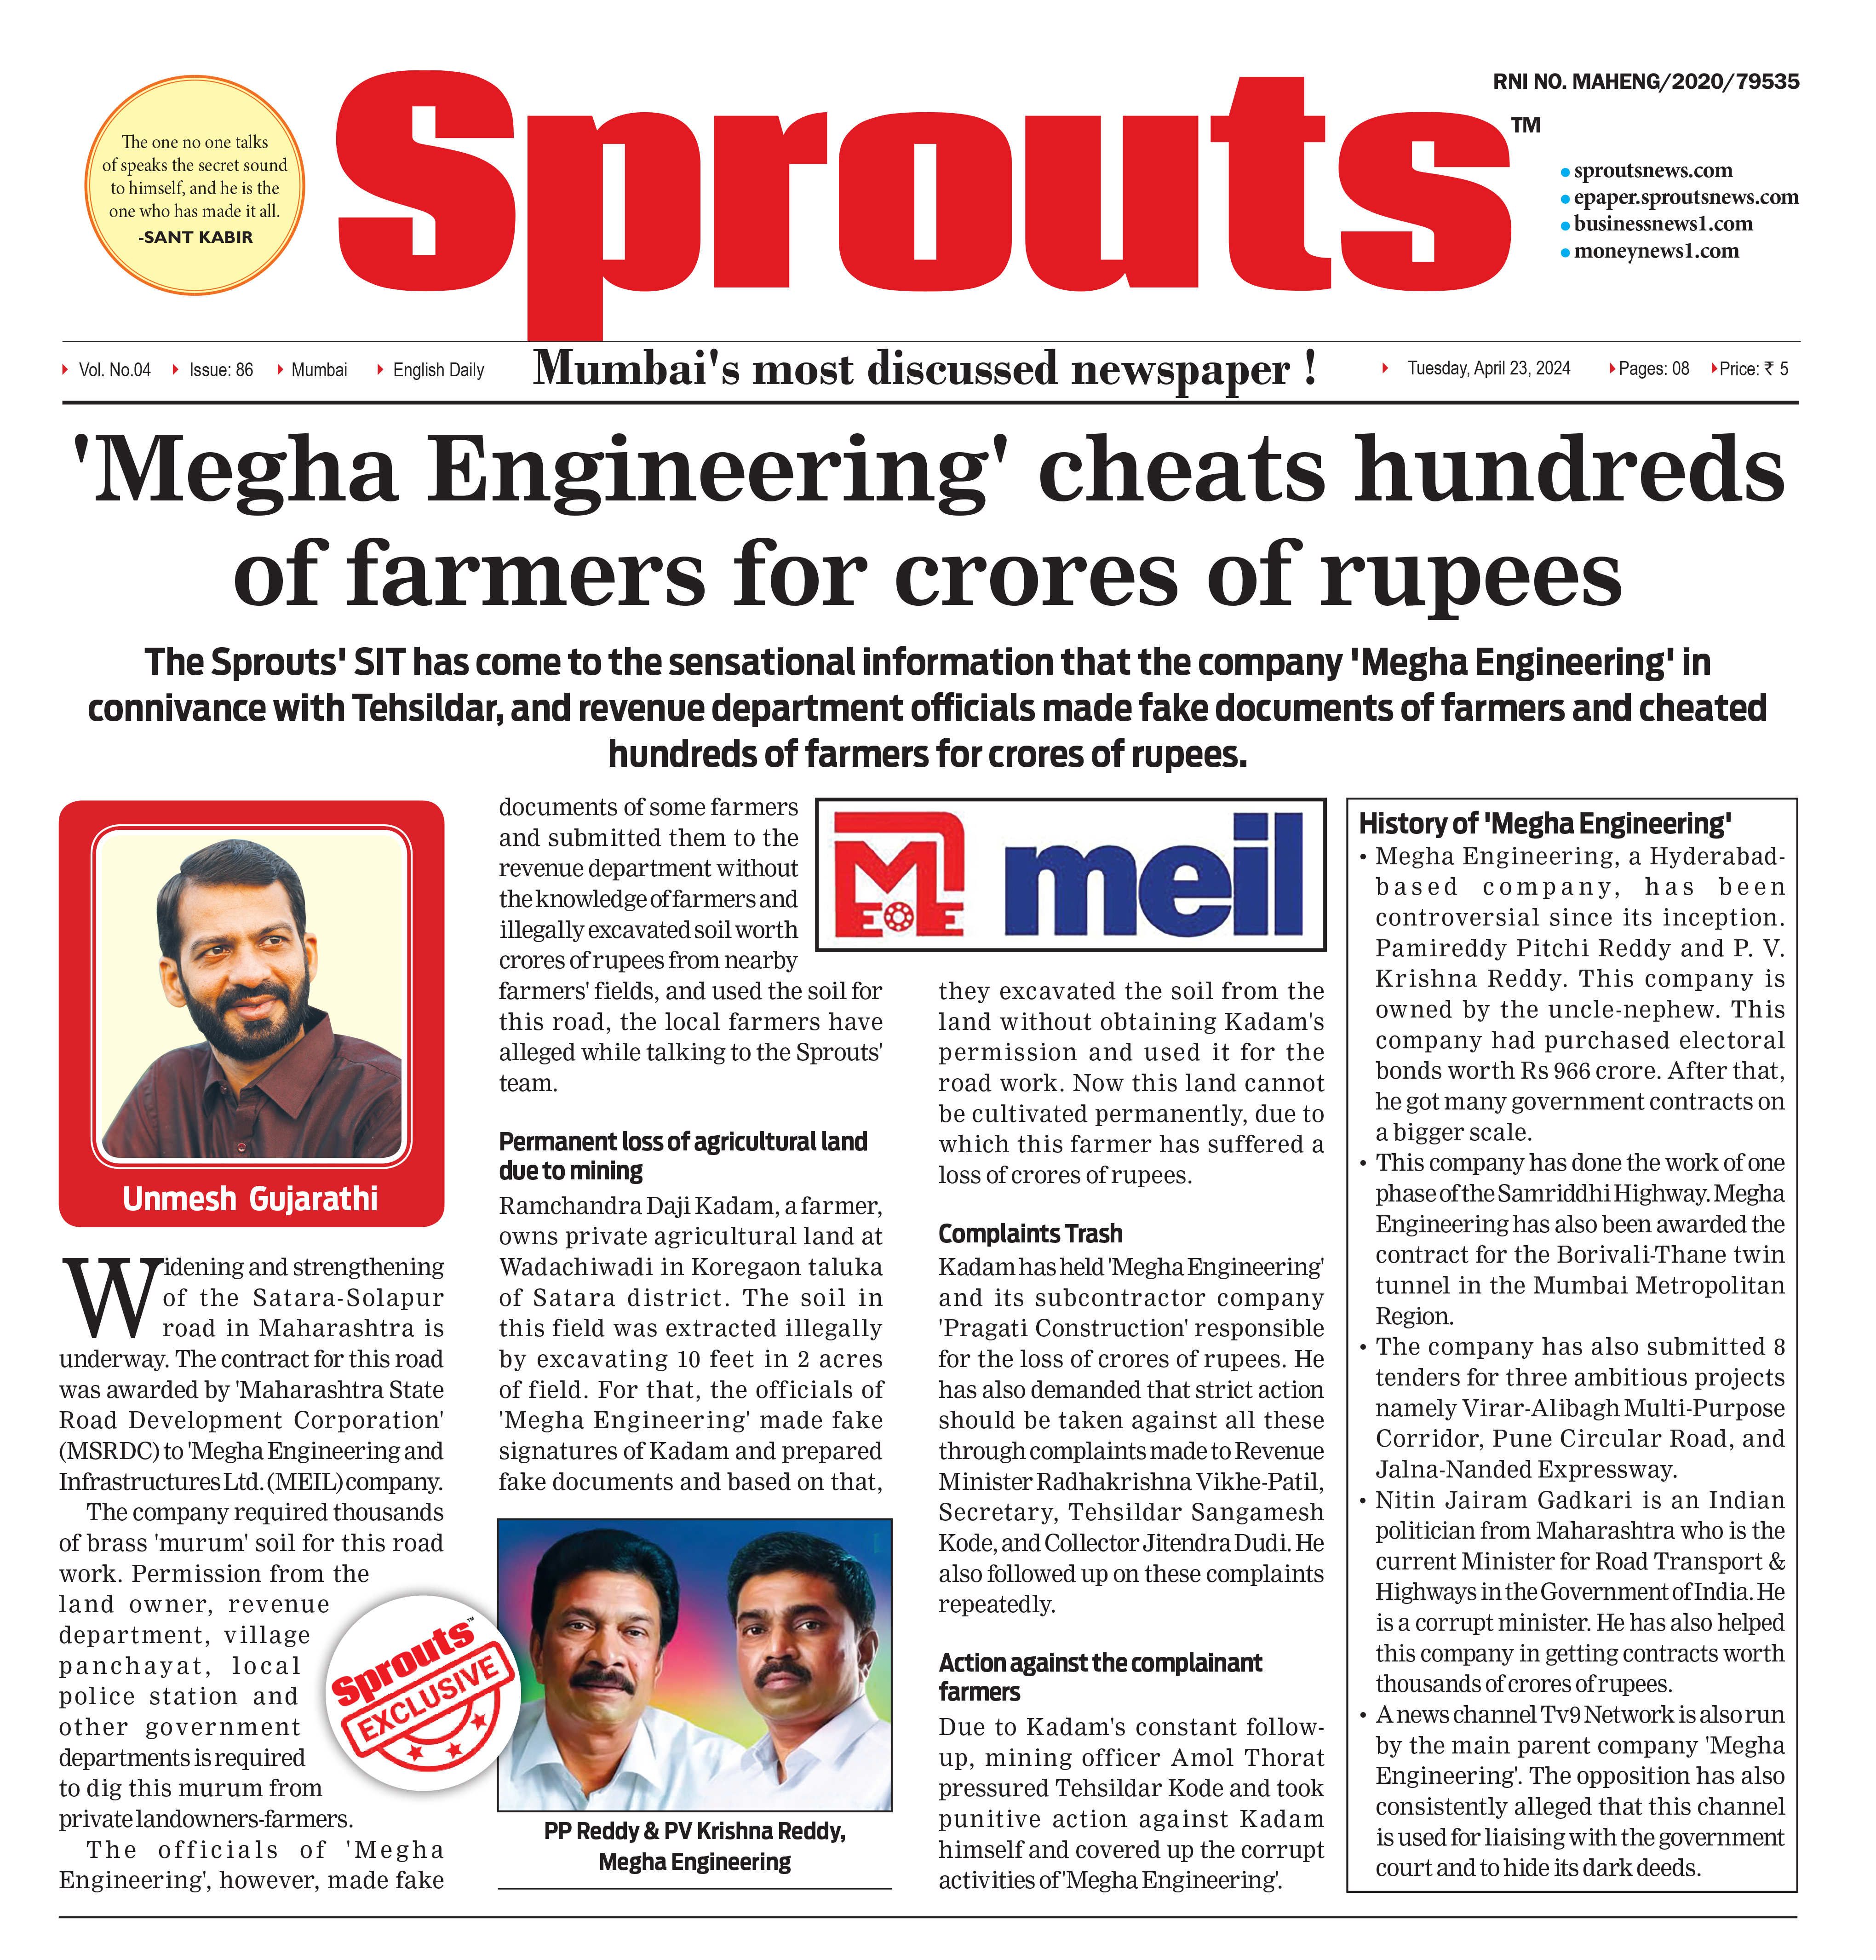 ‘Megha Engineering’ cheats hundreds of farmers for crores of rupees